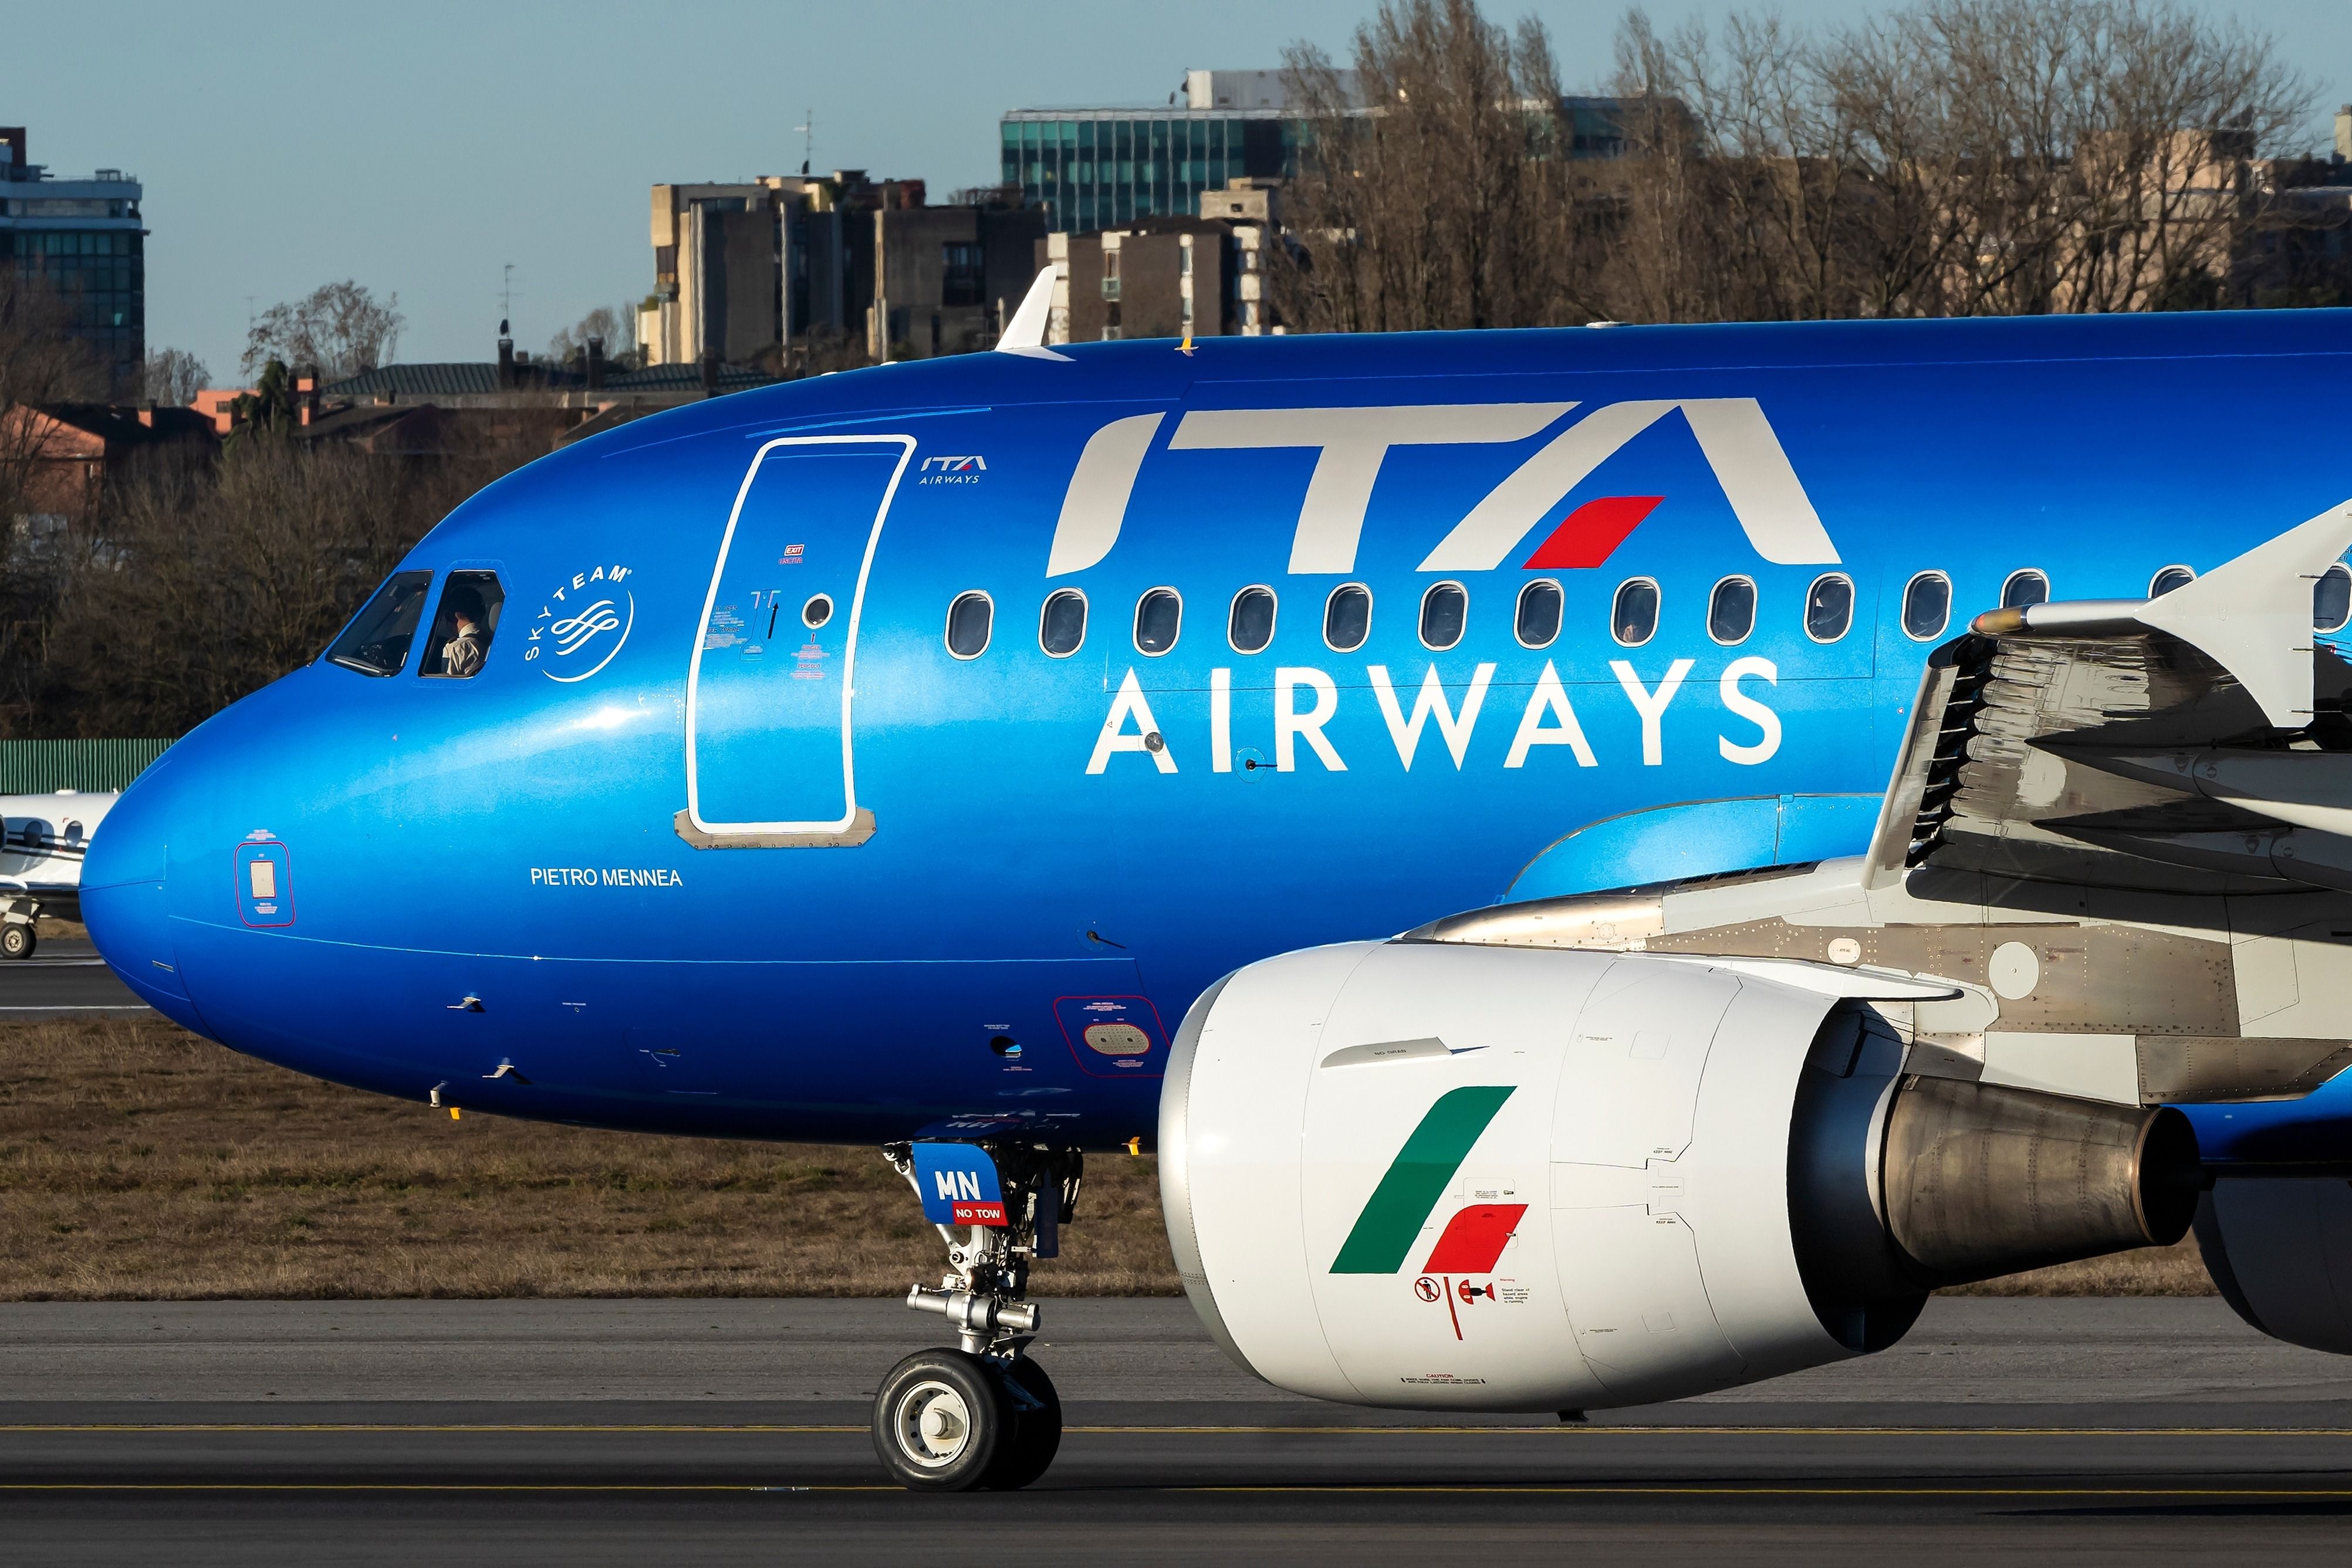  Airbus 319 (EI-IMN) wearing the new livery of ITA Airways, on the runway of Linate Airport